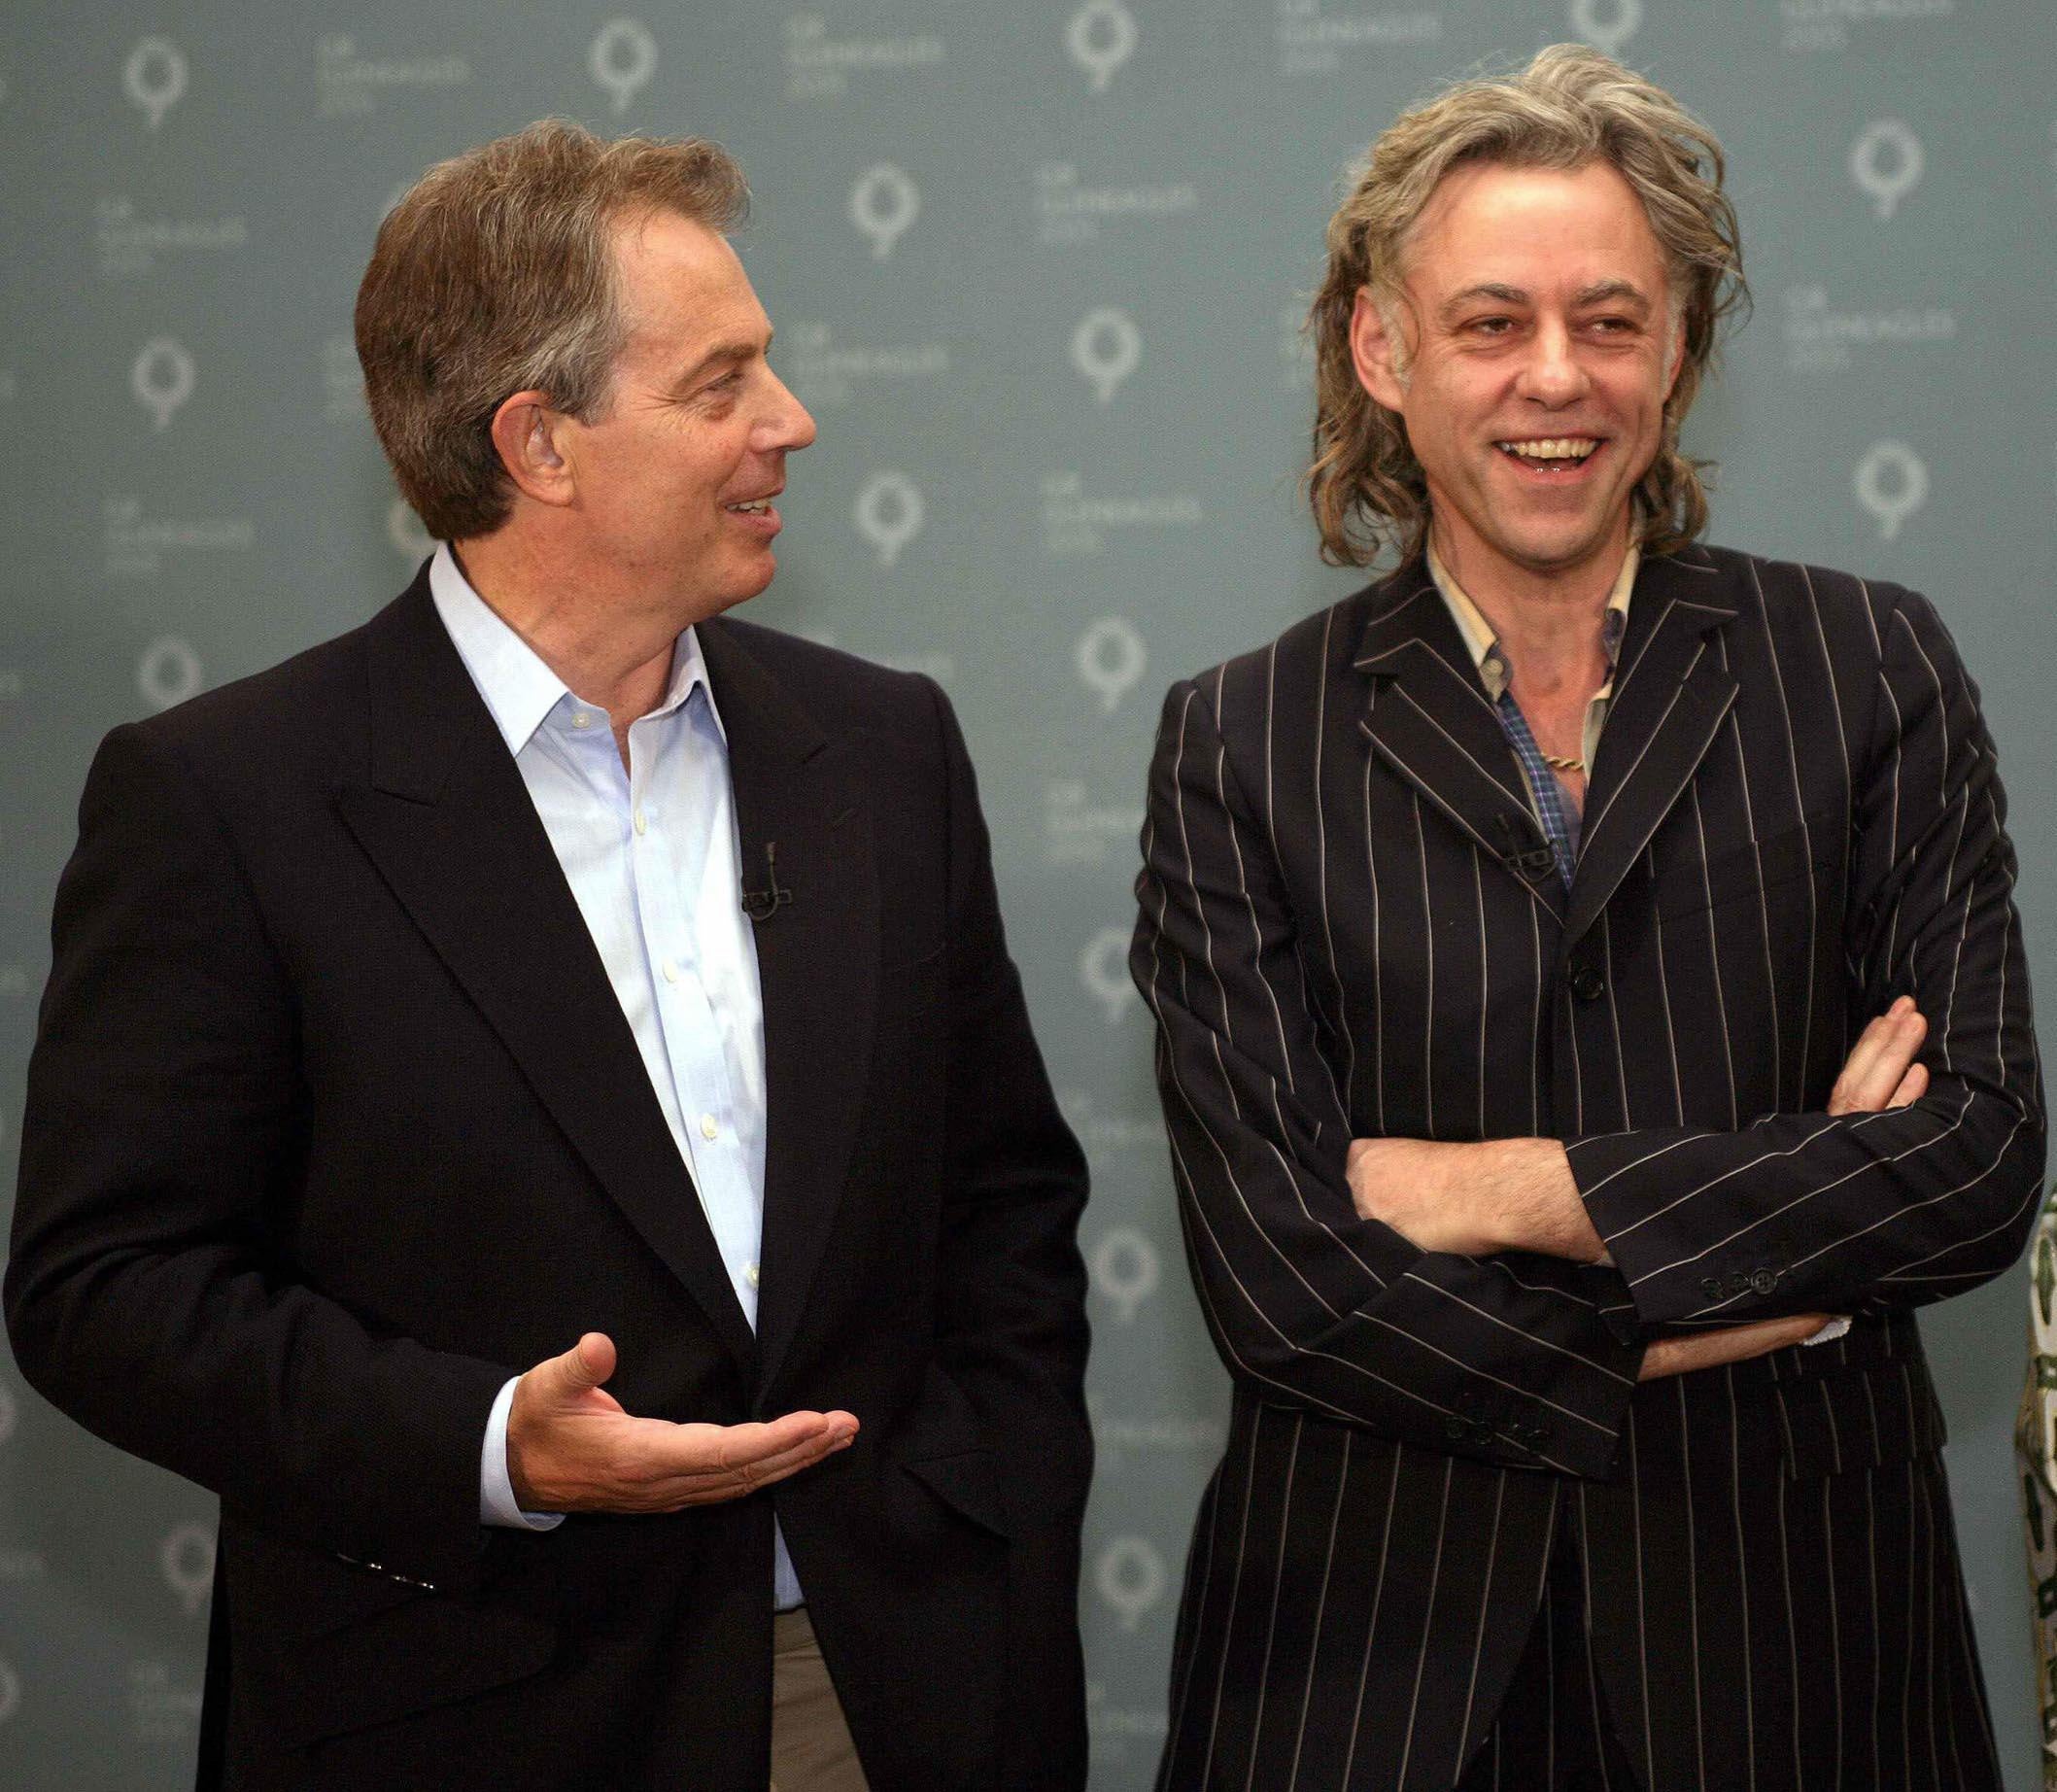 Blair with Bob Geldof in 2005 during preparations for Live Aid, which coincided with a G8 summit meeting